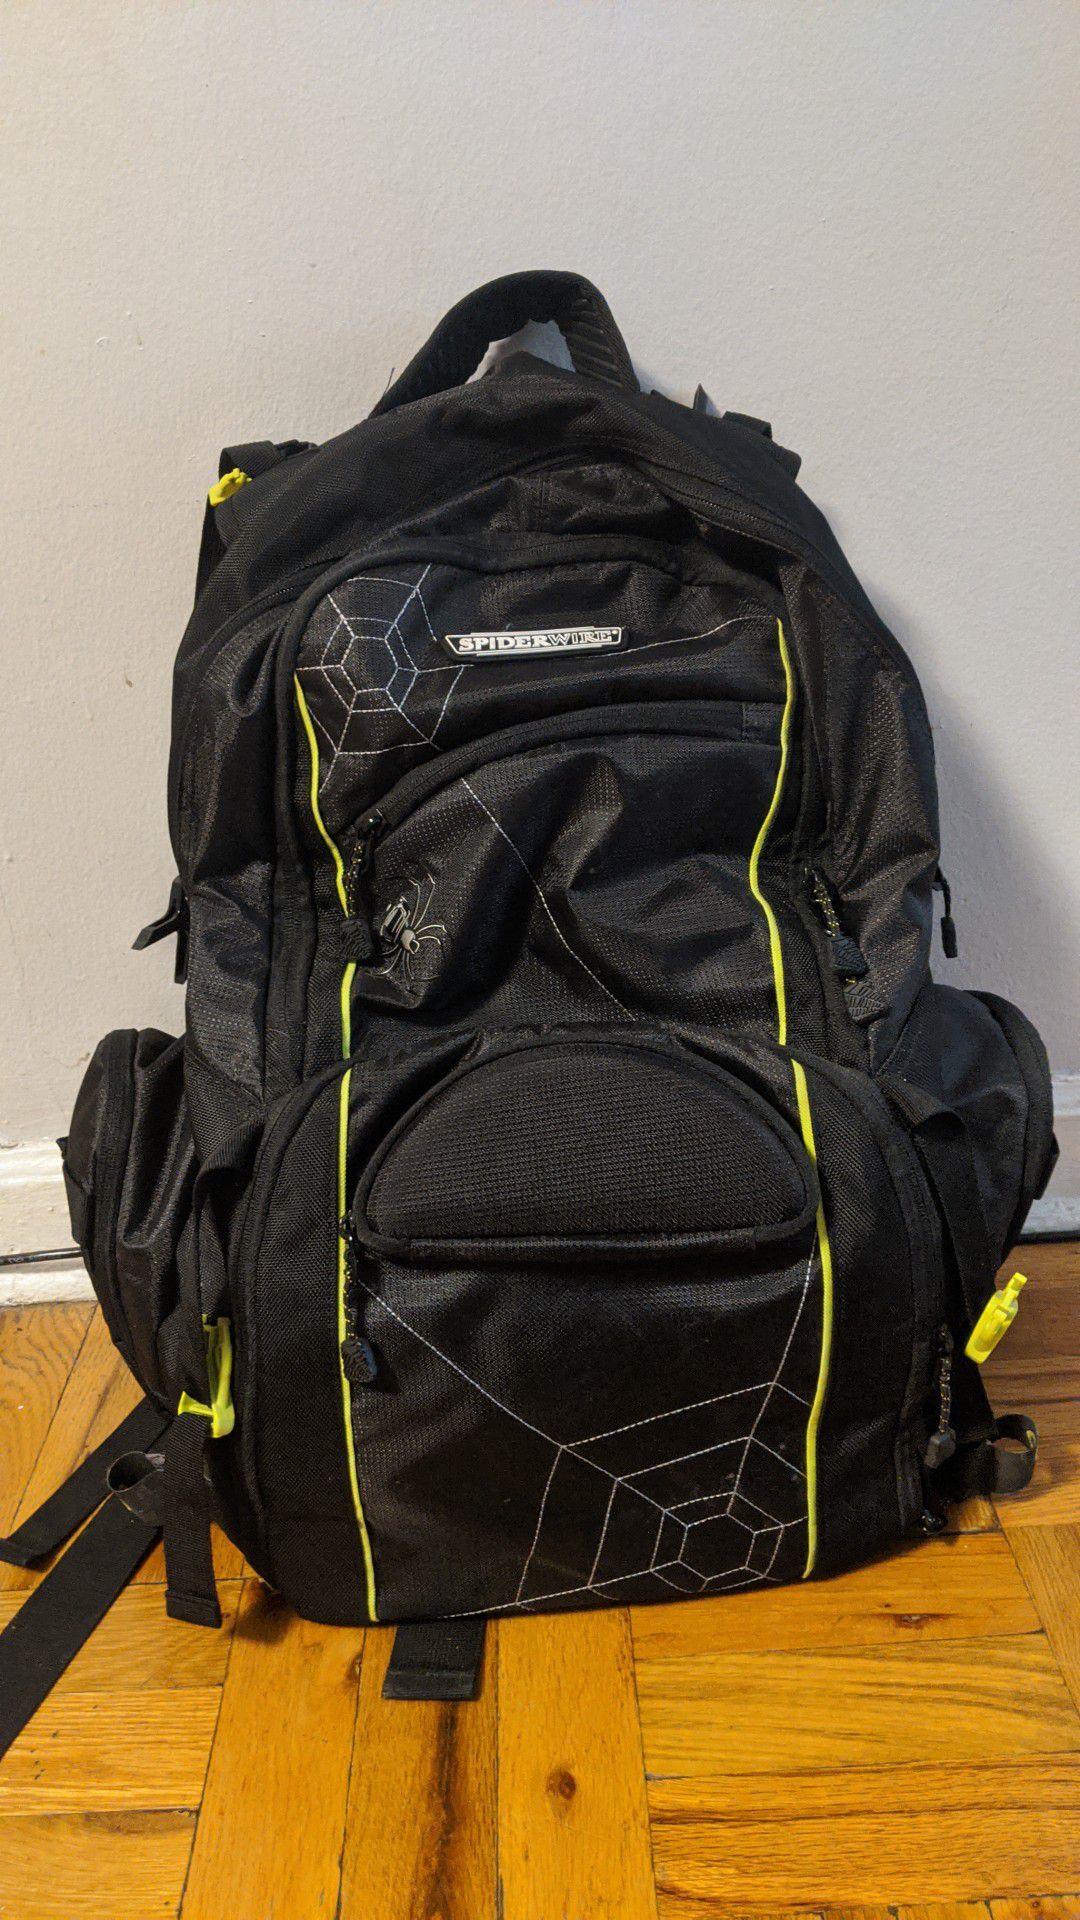 Spiderwire fishing tackle backpack